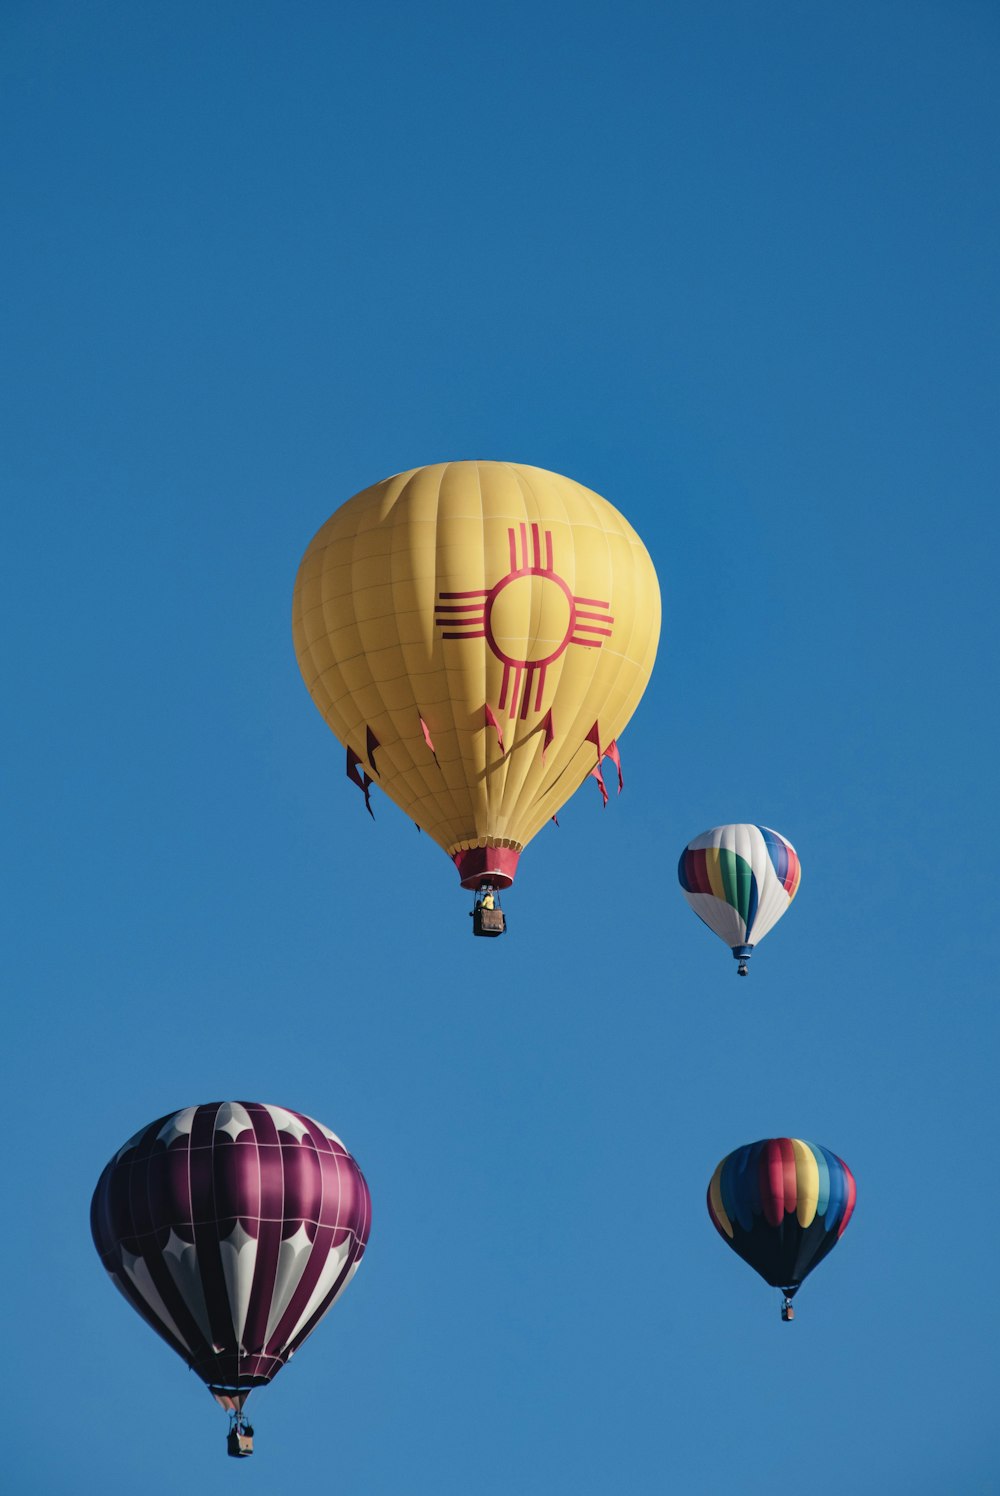 yellow hot air balloon in mid air under blue sky during daytime